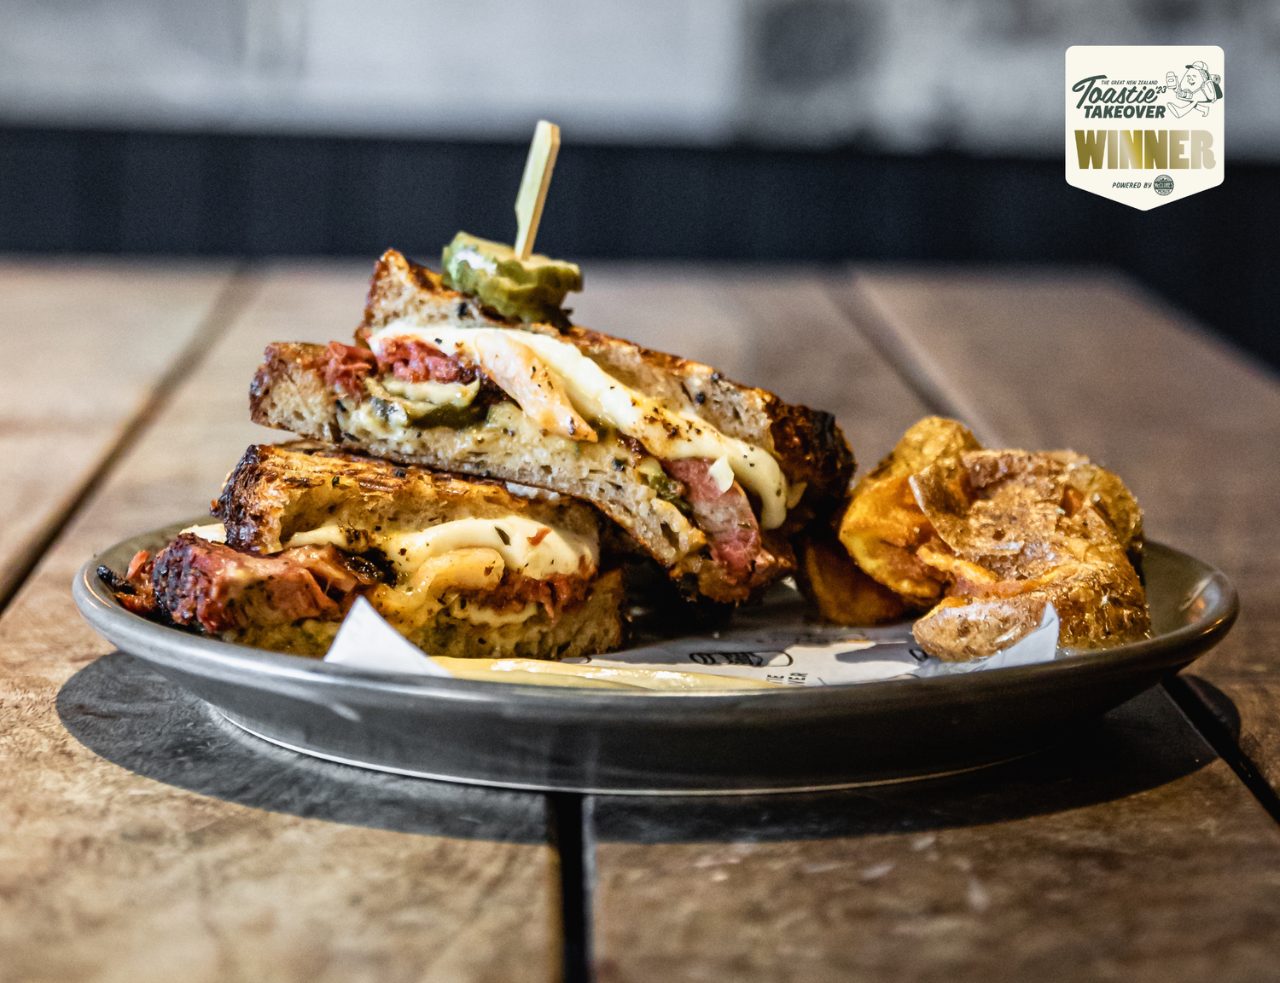 New Zealand's top toastie of the year has been crowned and it's a smoked lamb masterpiece